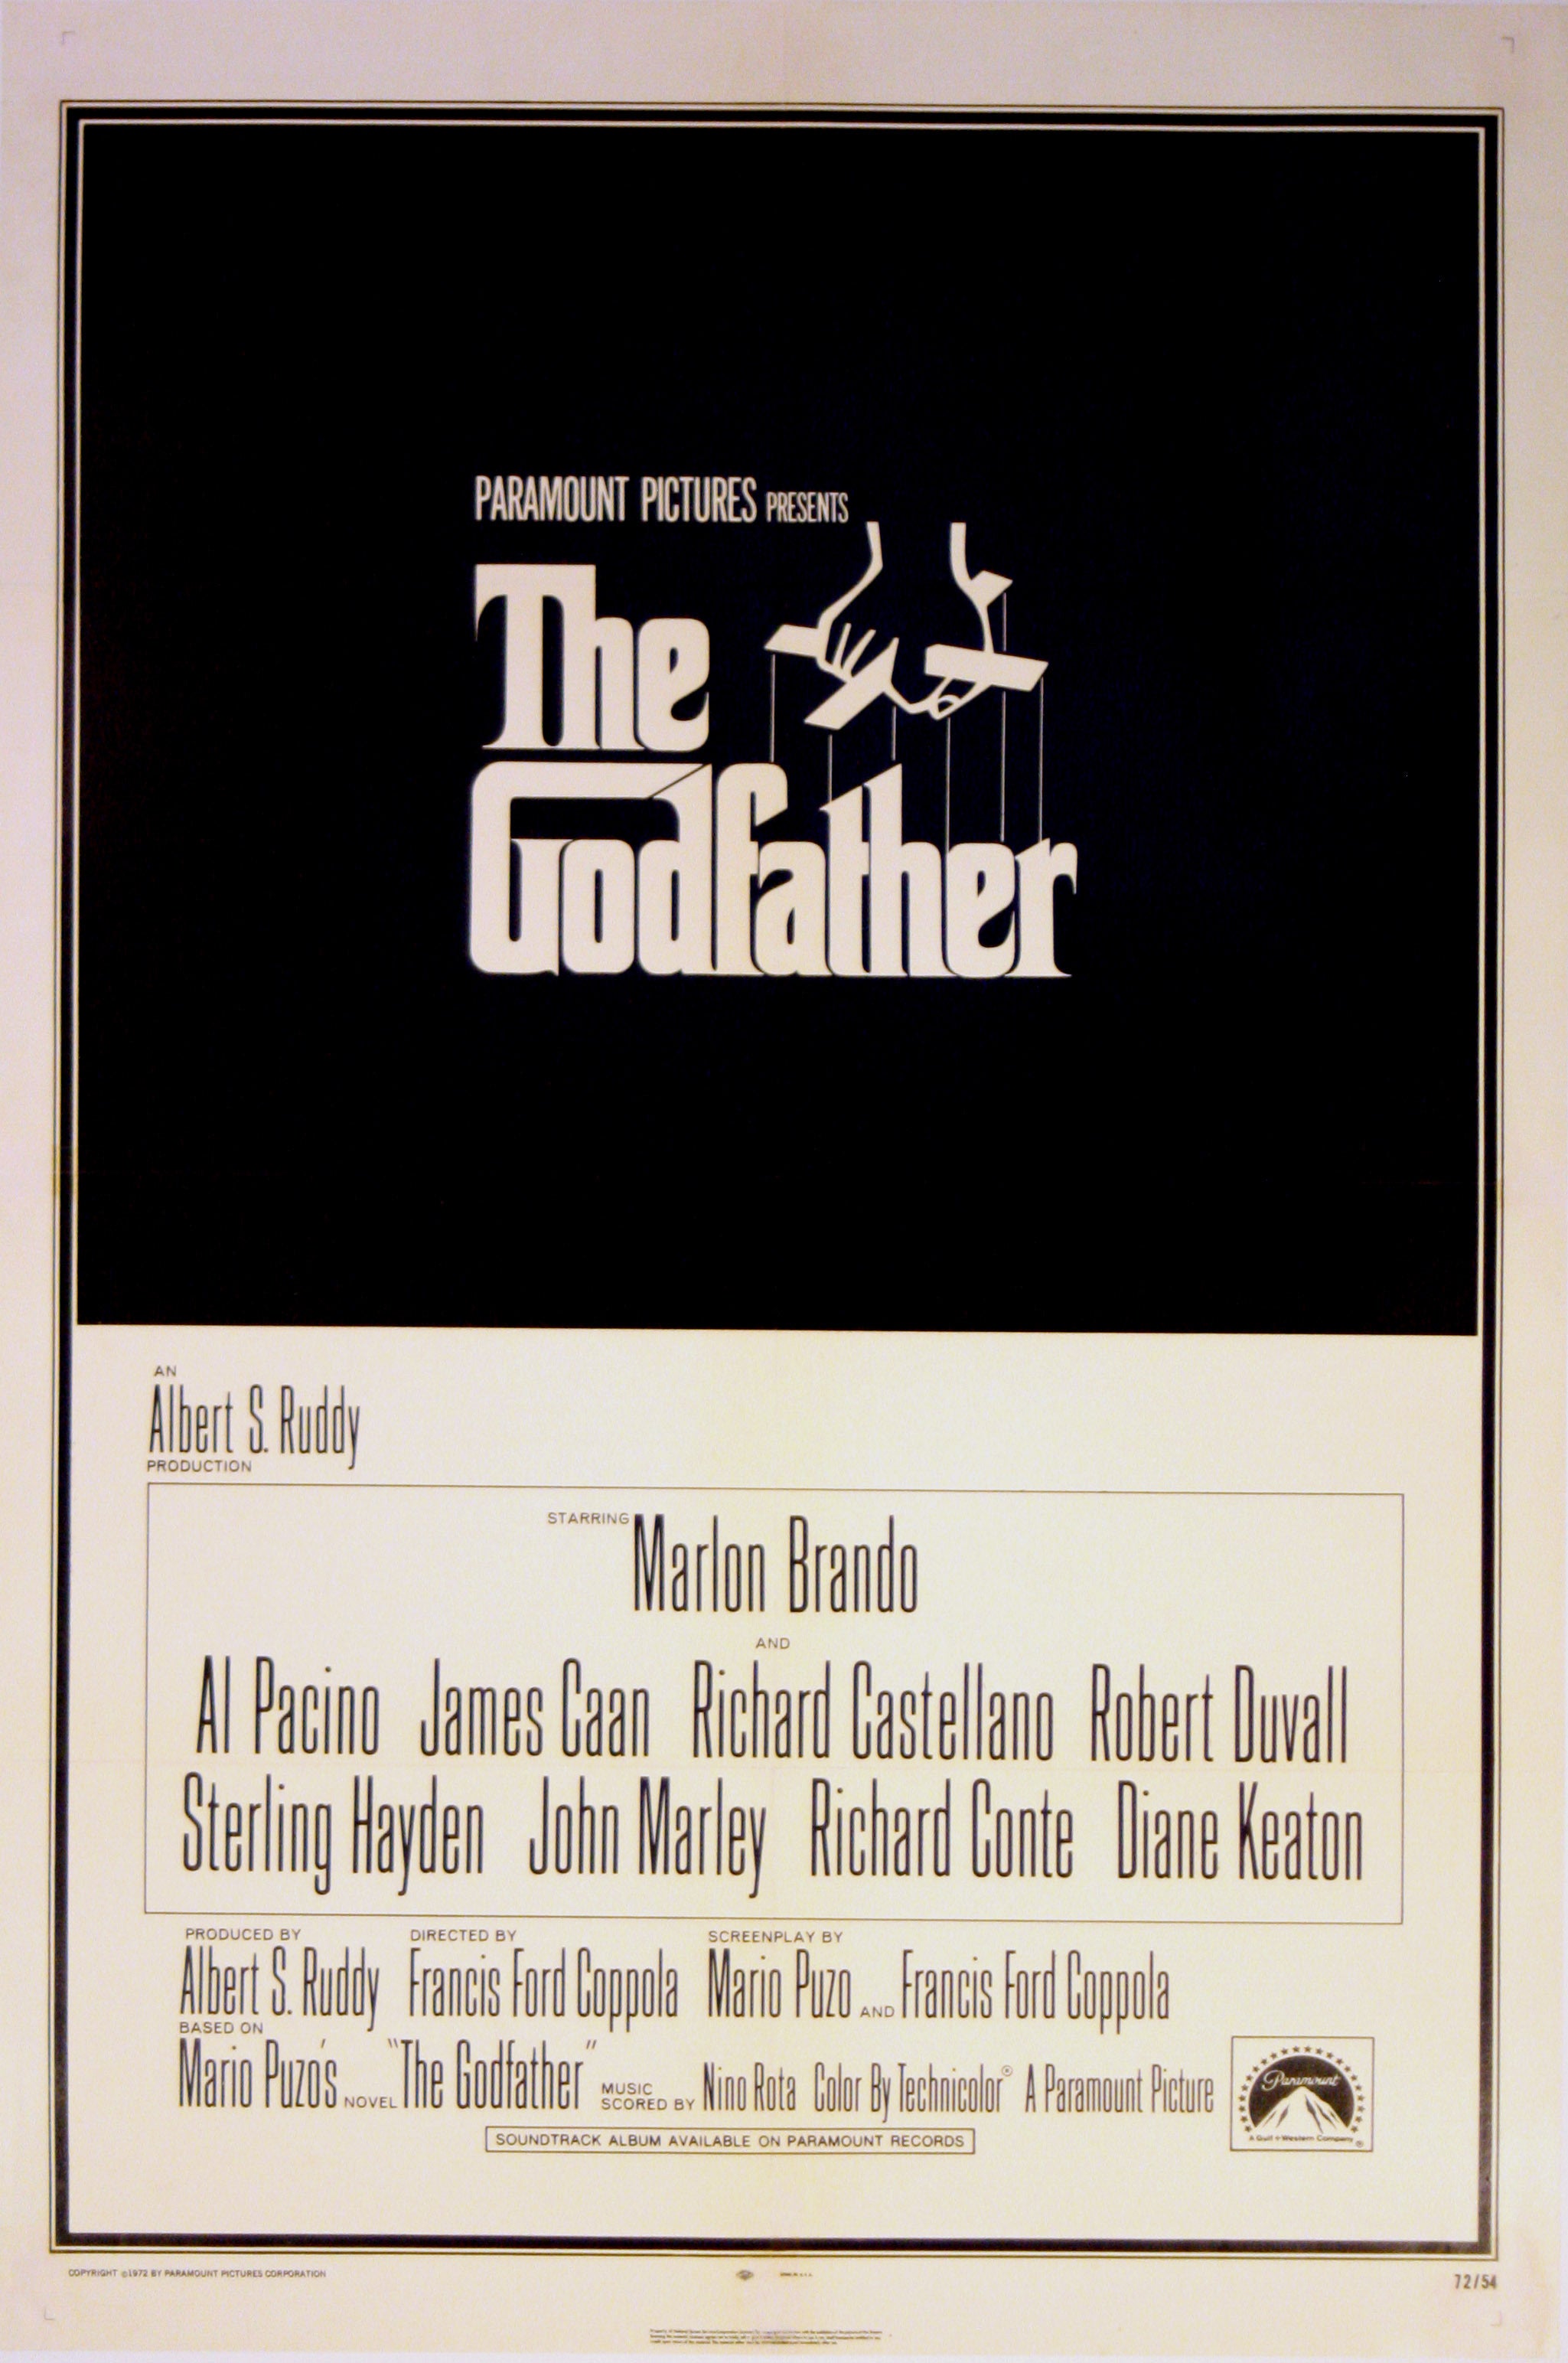 Original vintage movie poster for Mario Puzo and Francis Ford Coppola's The Godfather starring Marlon Brando and Al Pacino